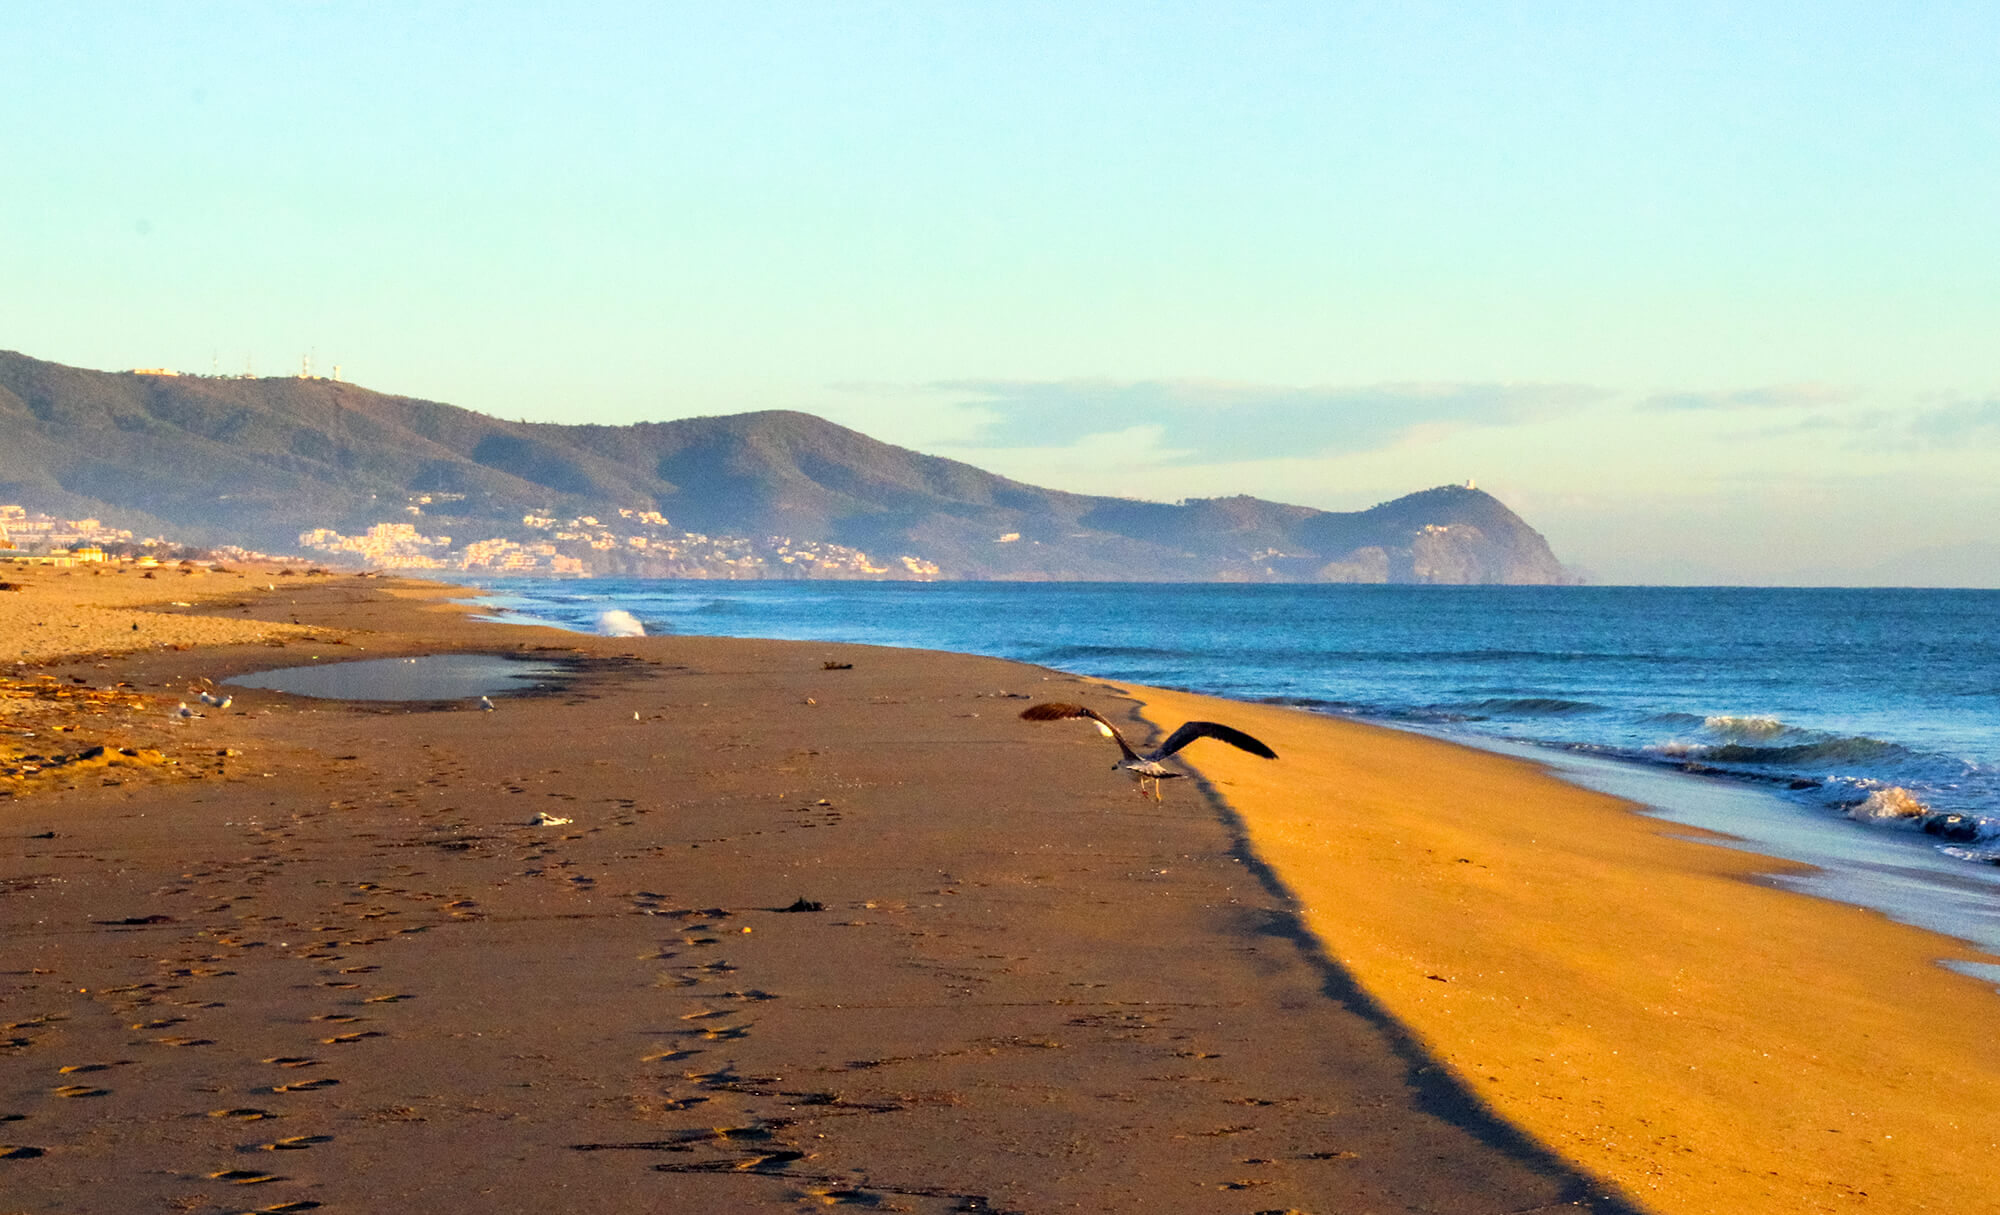 What to See and Do in Tetouan: An inspiring journey high into the mountains - Tamuda Bay and Martil Beach